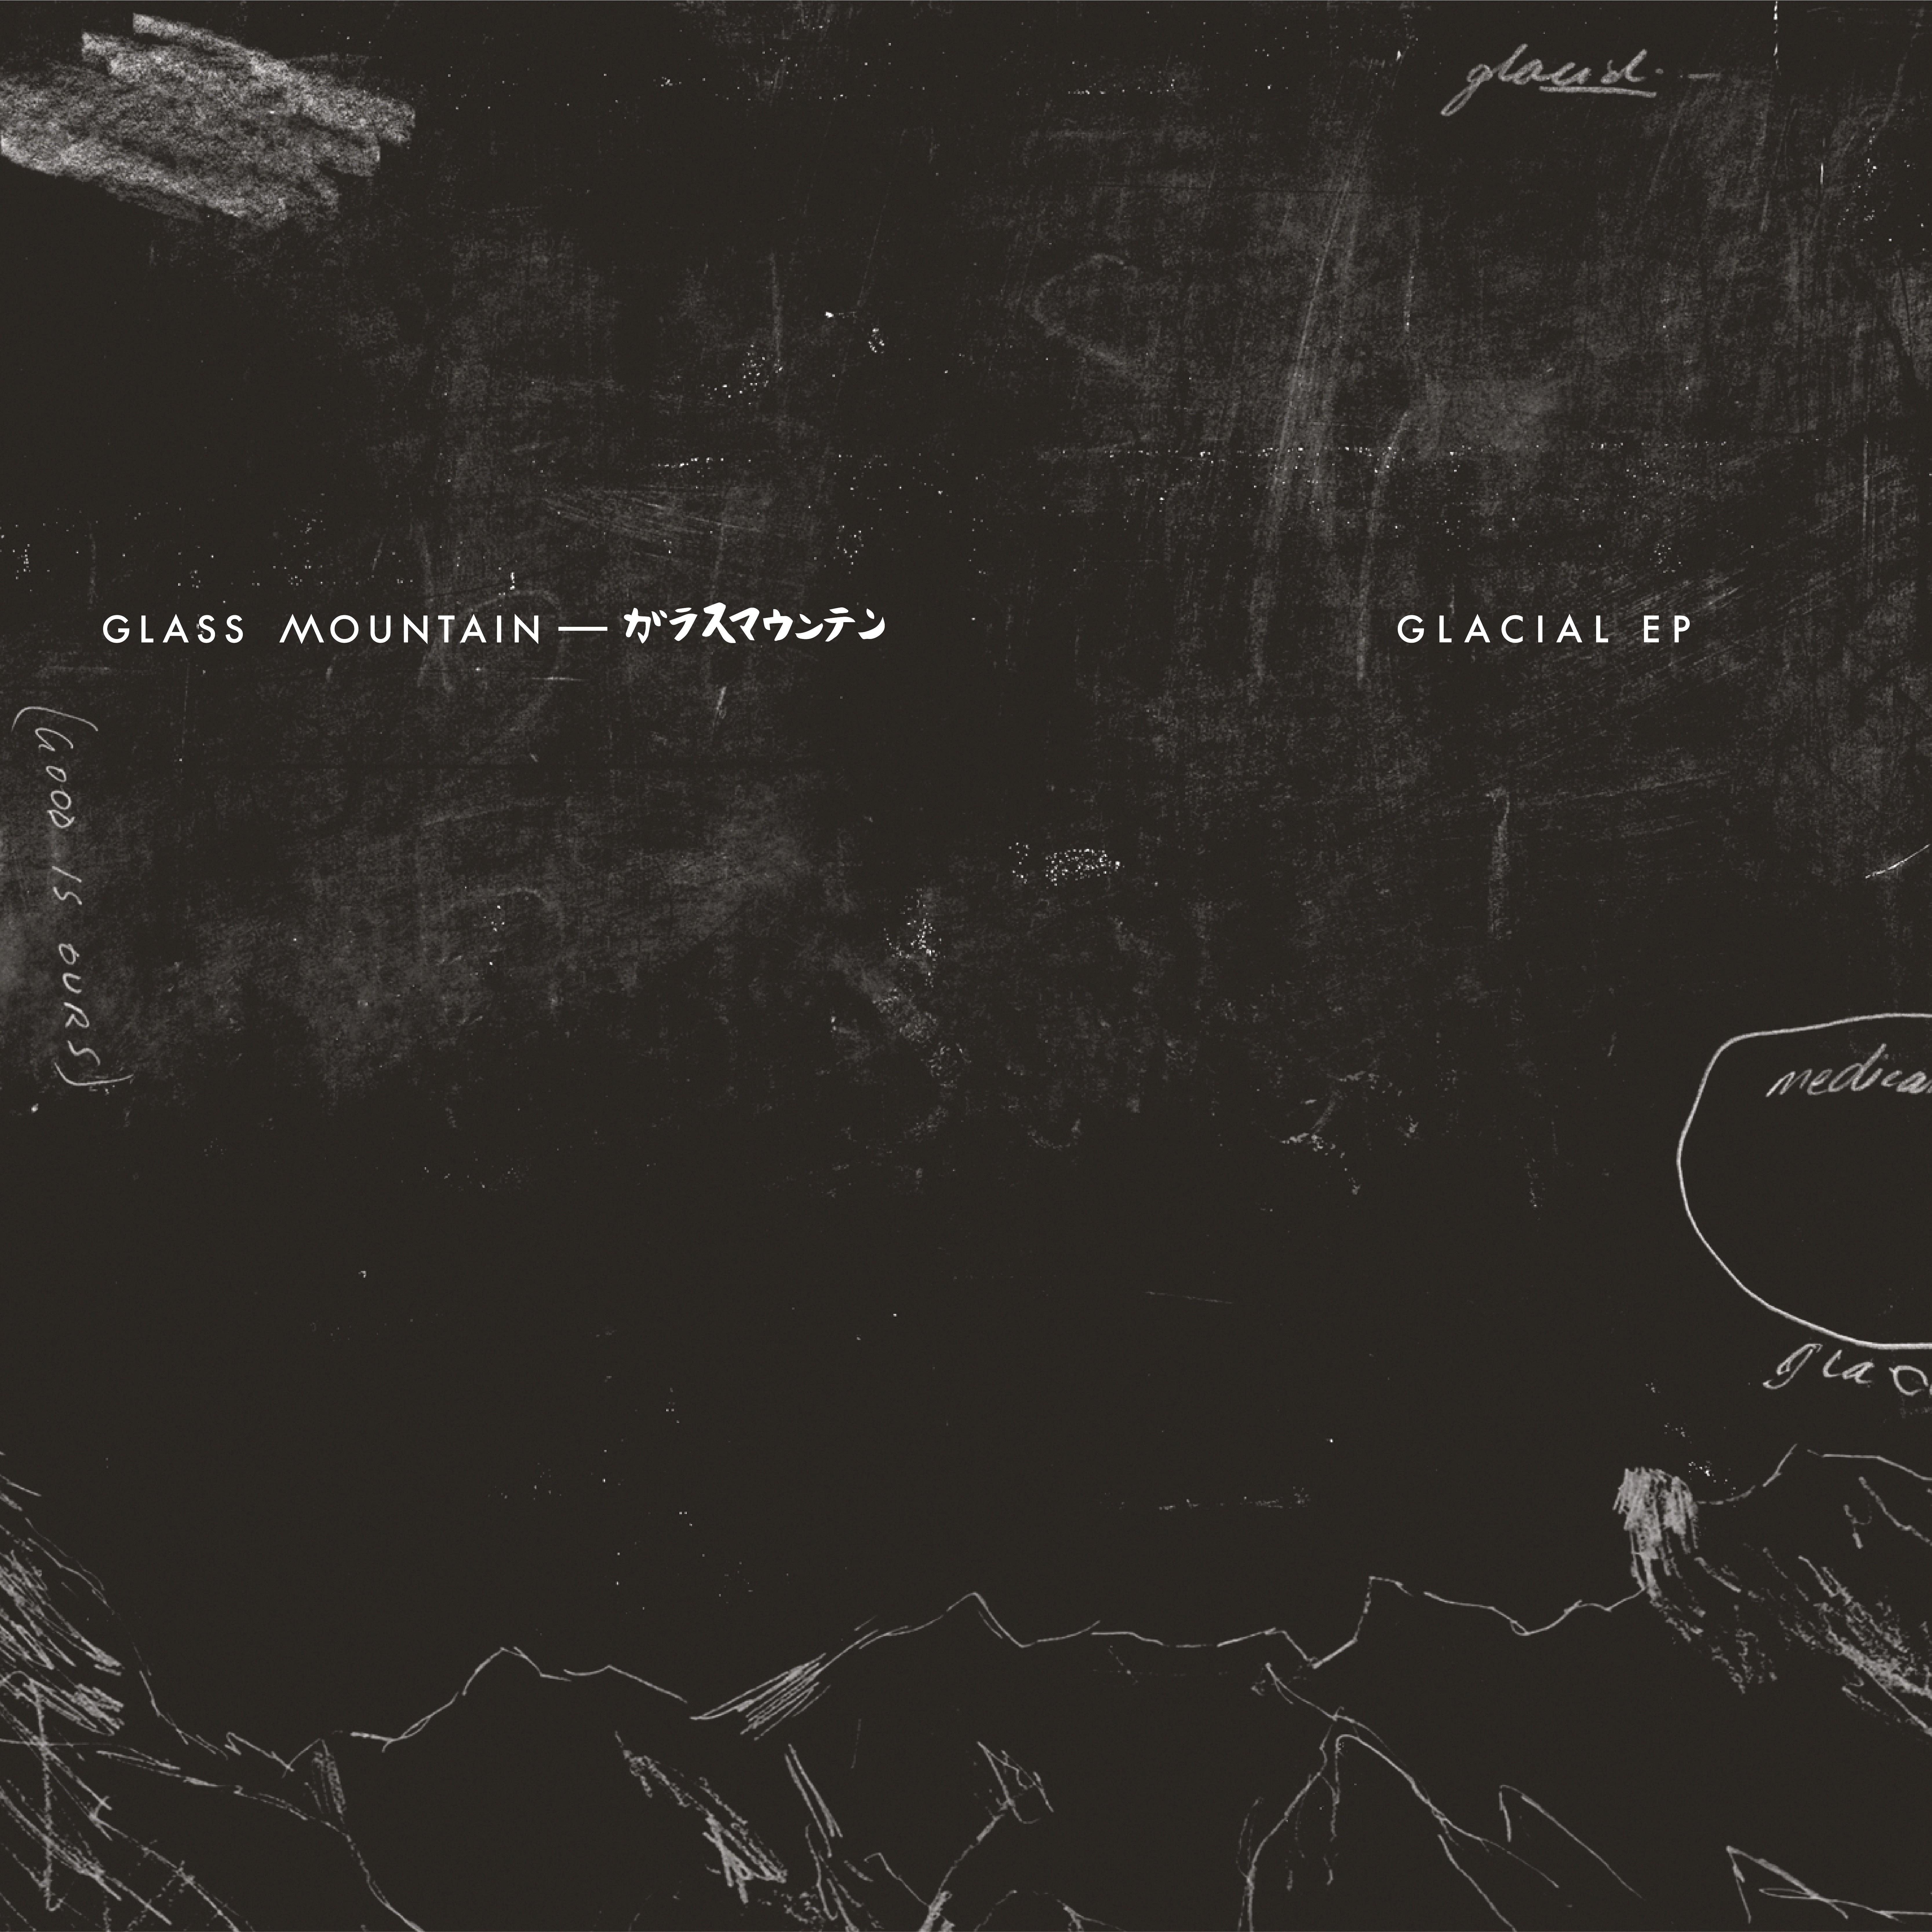 GLACIAL EP - Super Deluxe Limited Edition CD - Glass Mountain